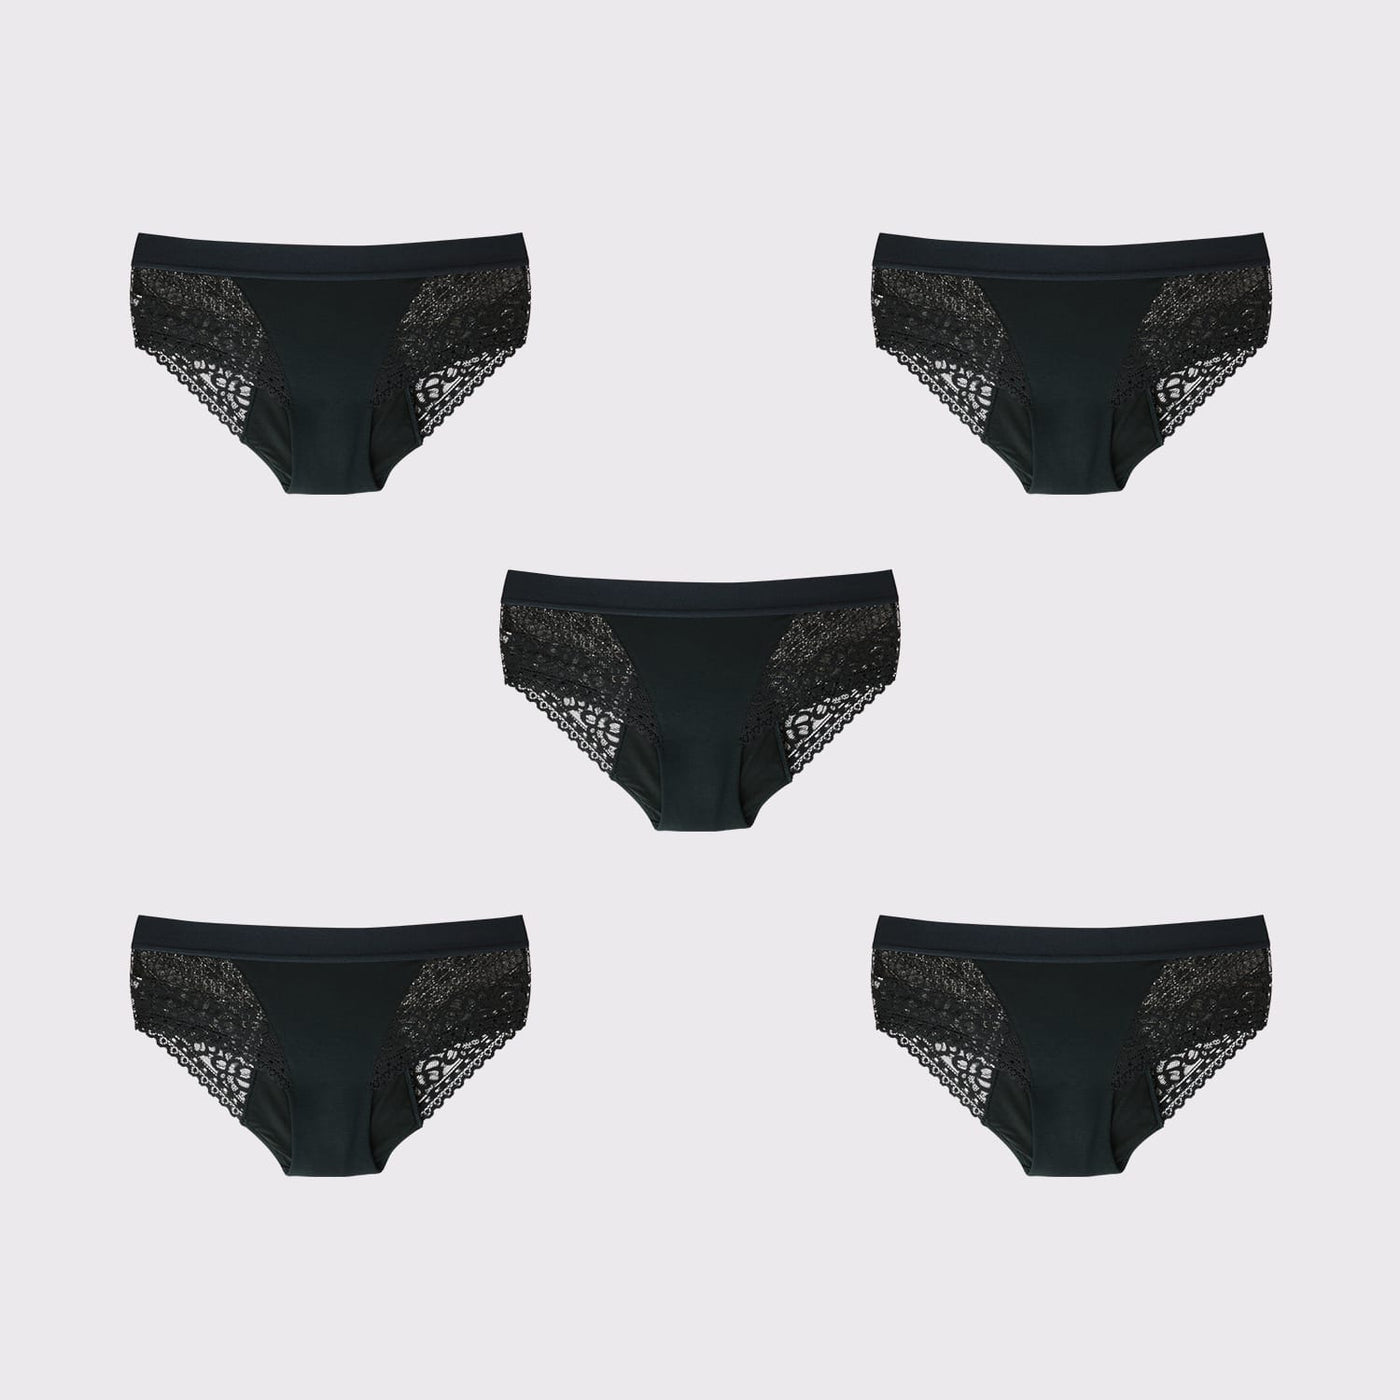 WUKA Ultimate Lace Hipster Brief Period Pants Style Medium Flow Black Colour 5 Pack